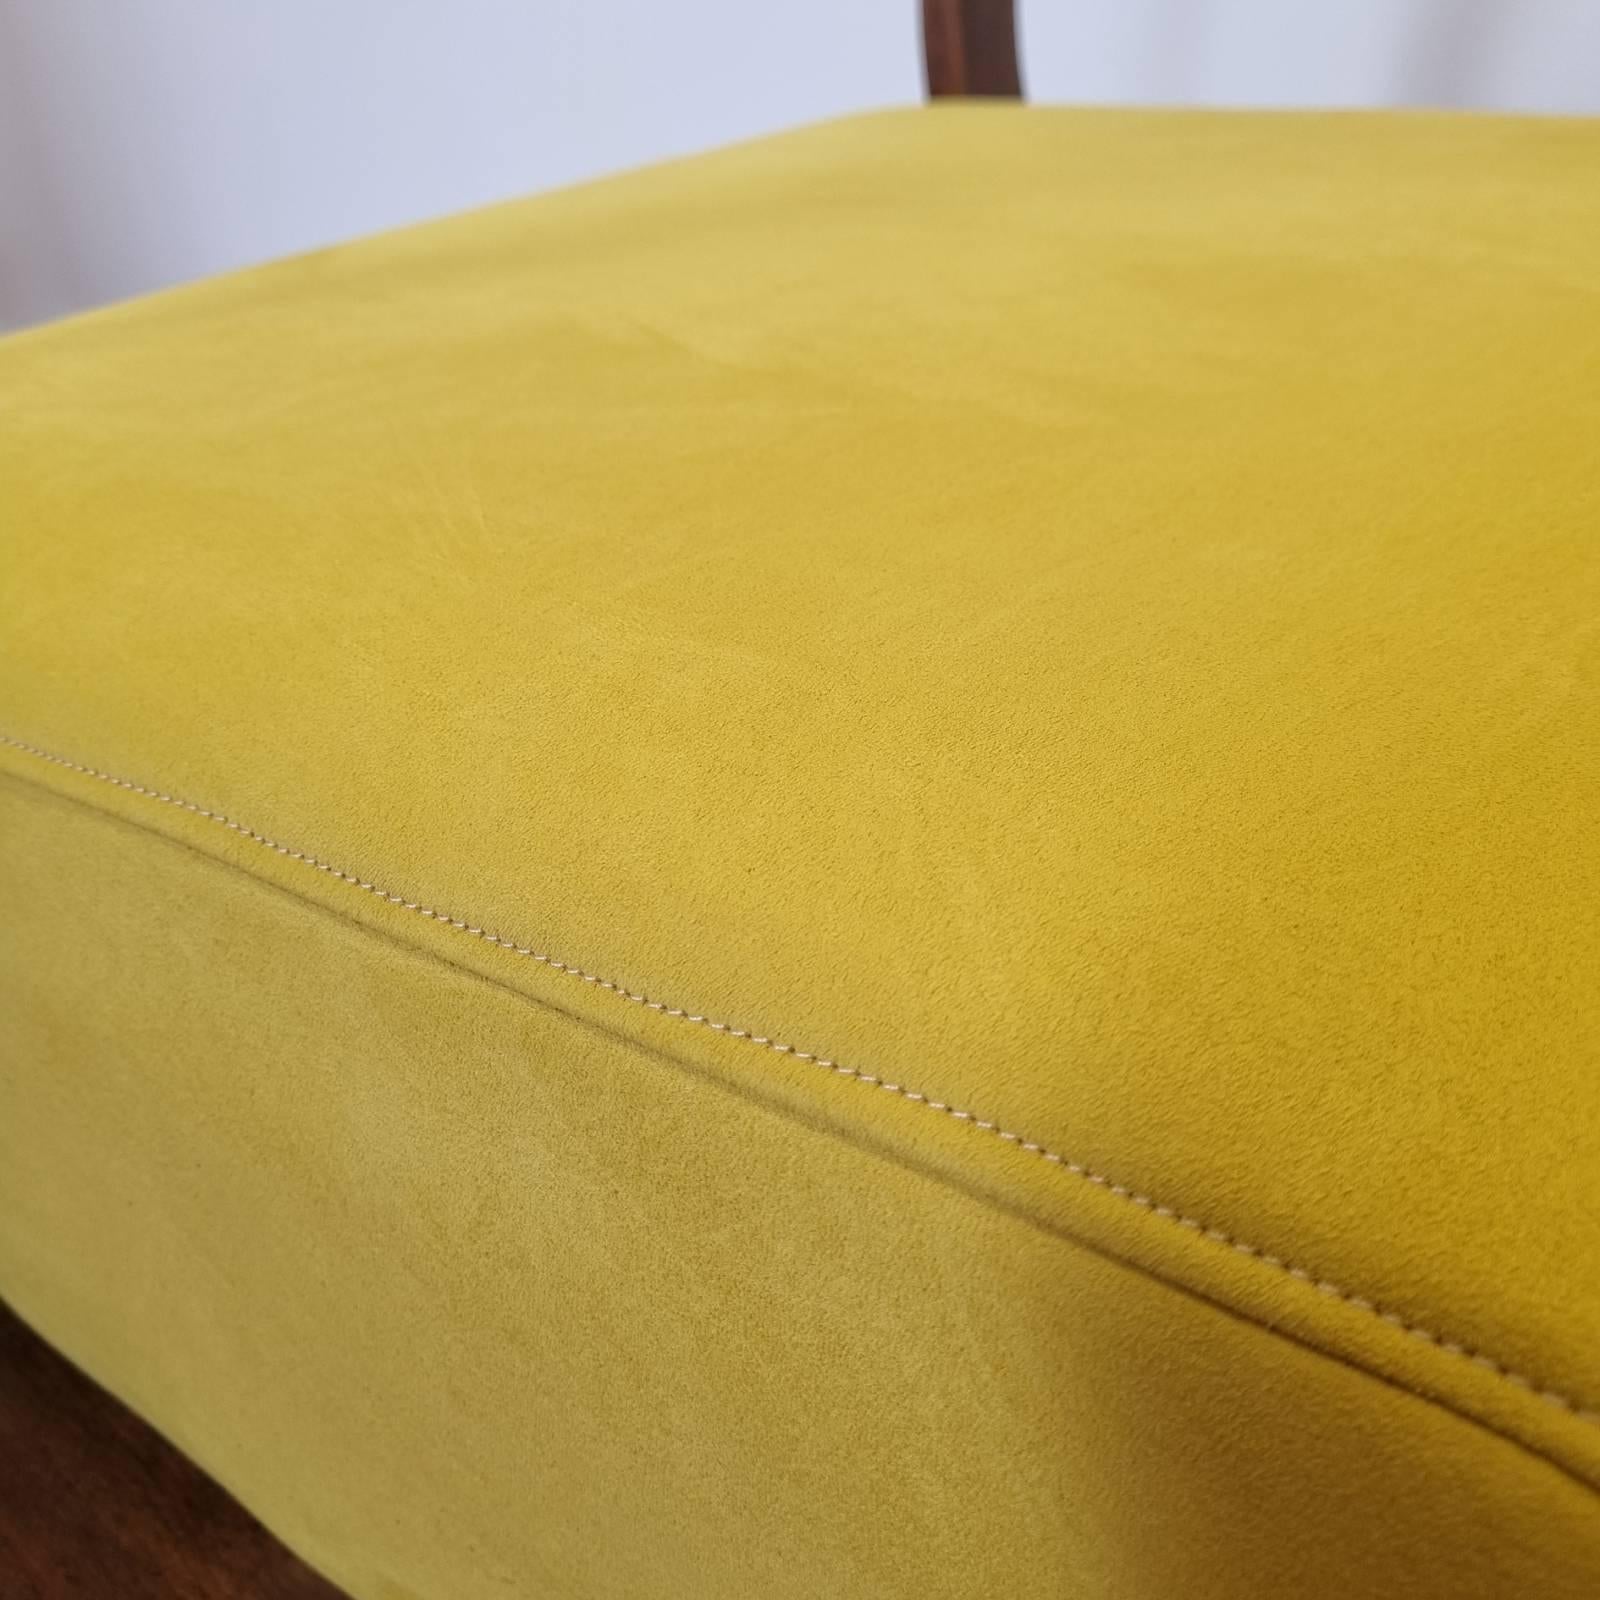 Original Art Deco armchair made in the 30s in Austria

It was recently reupholstered in yellow alcantara fabric